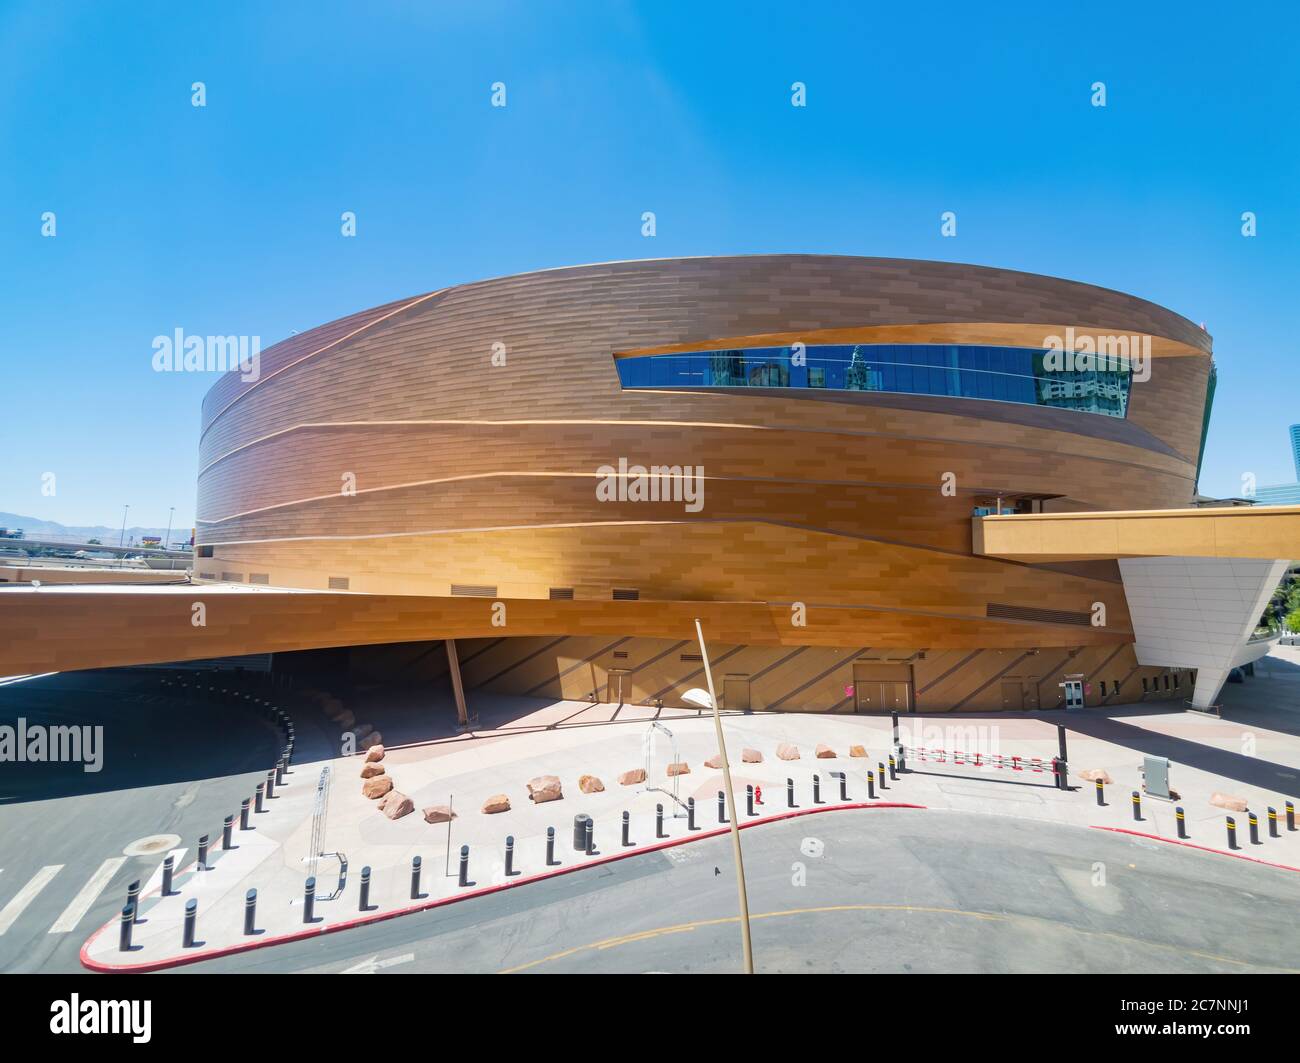 T mobile arena hi-res stock photography and images - Alamy